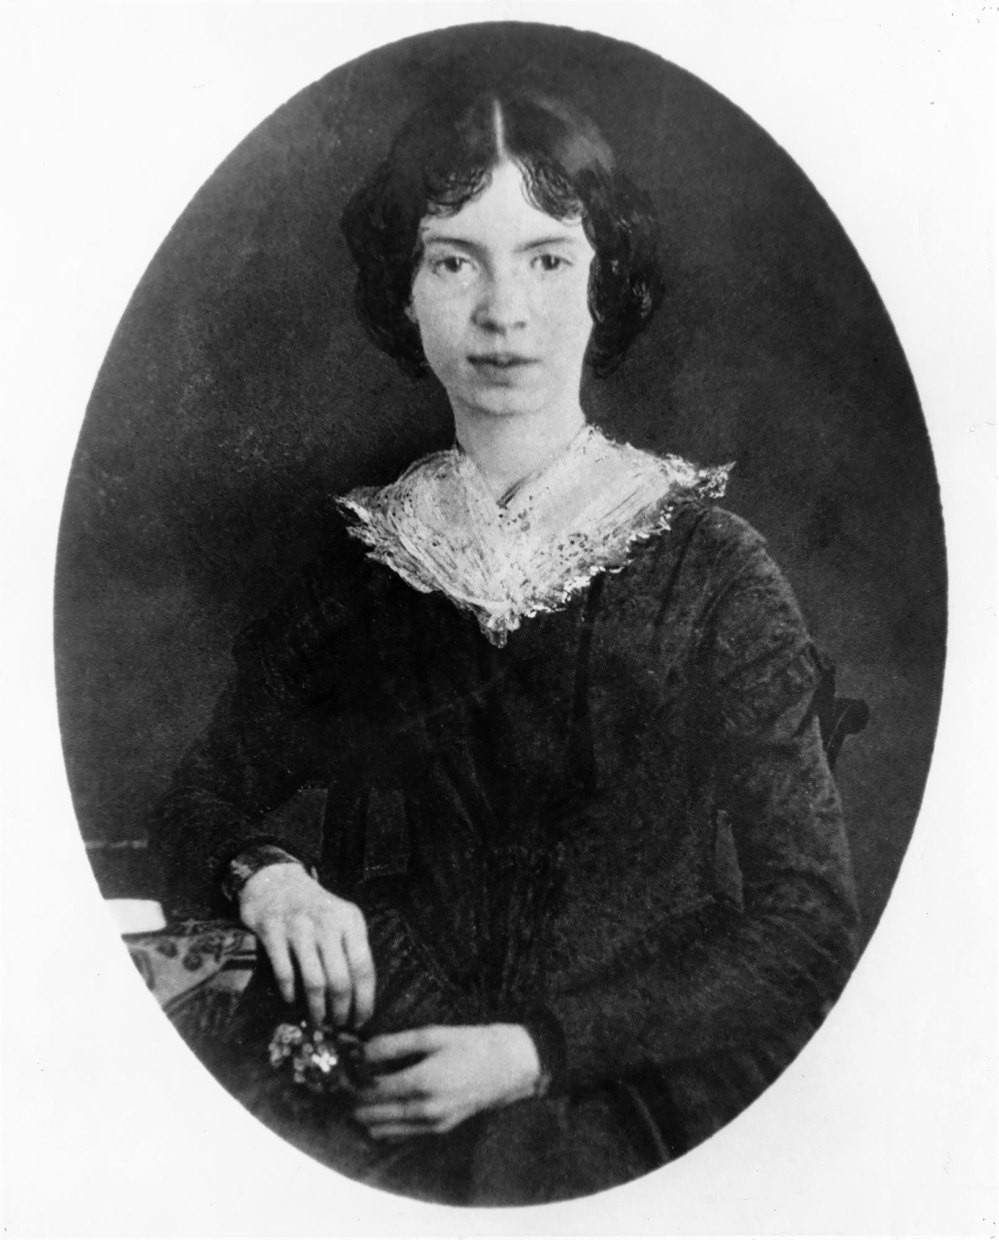 Ancestry Reveals Taylor Swift Is Related to Late Poet Emily Dickinson